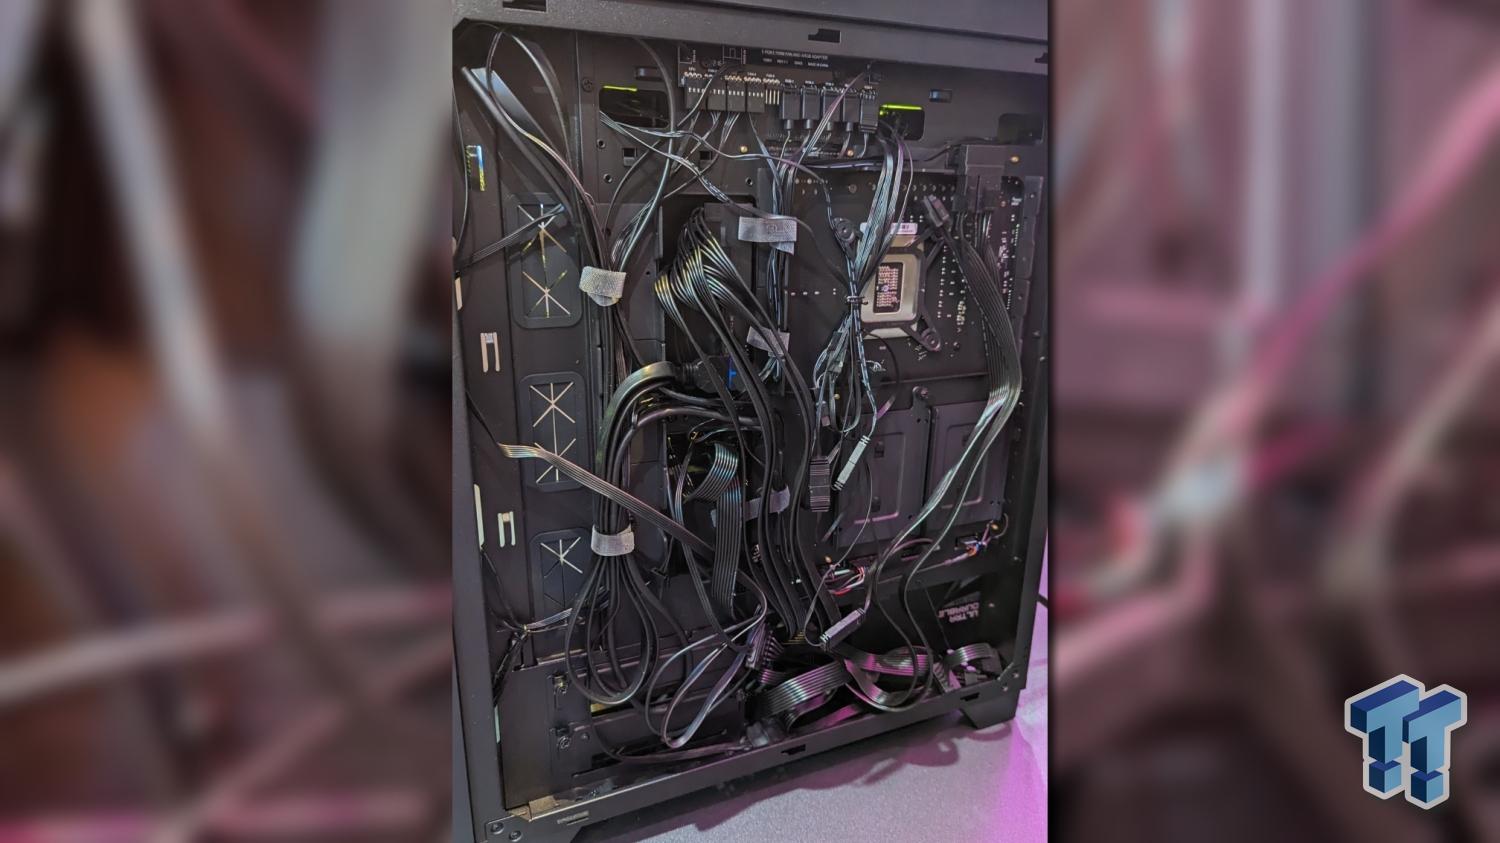 TweakTown Enlarged Image - Behold! All of the hidden cables from the AORUS Stealth 500.